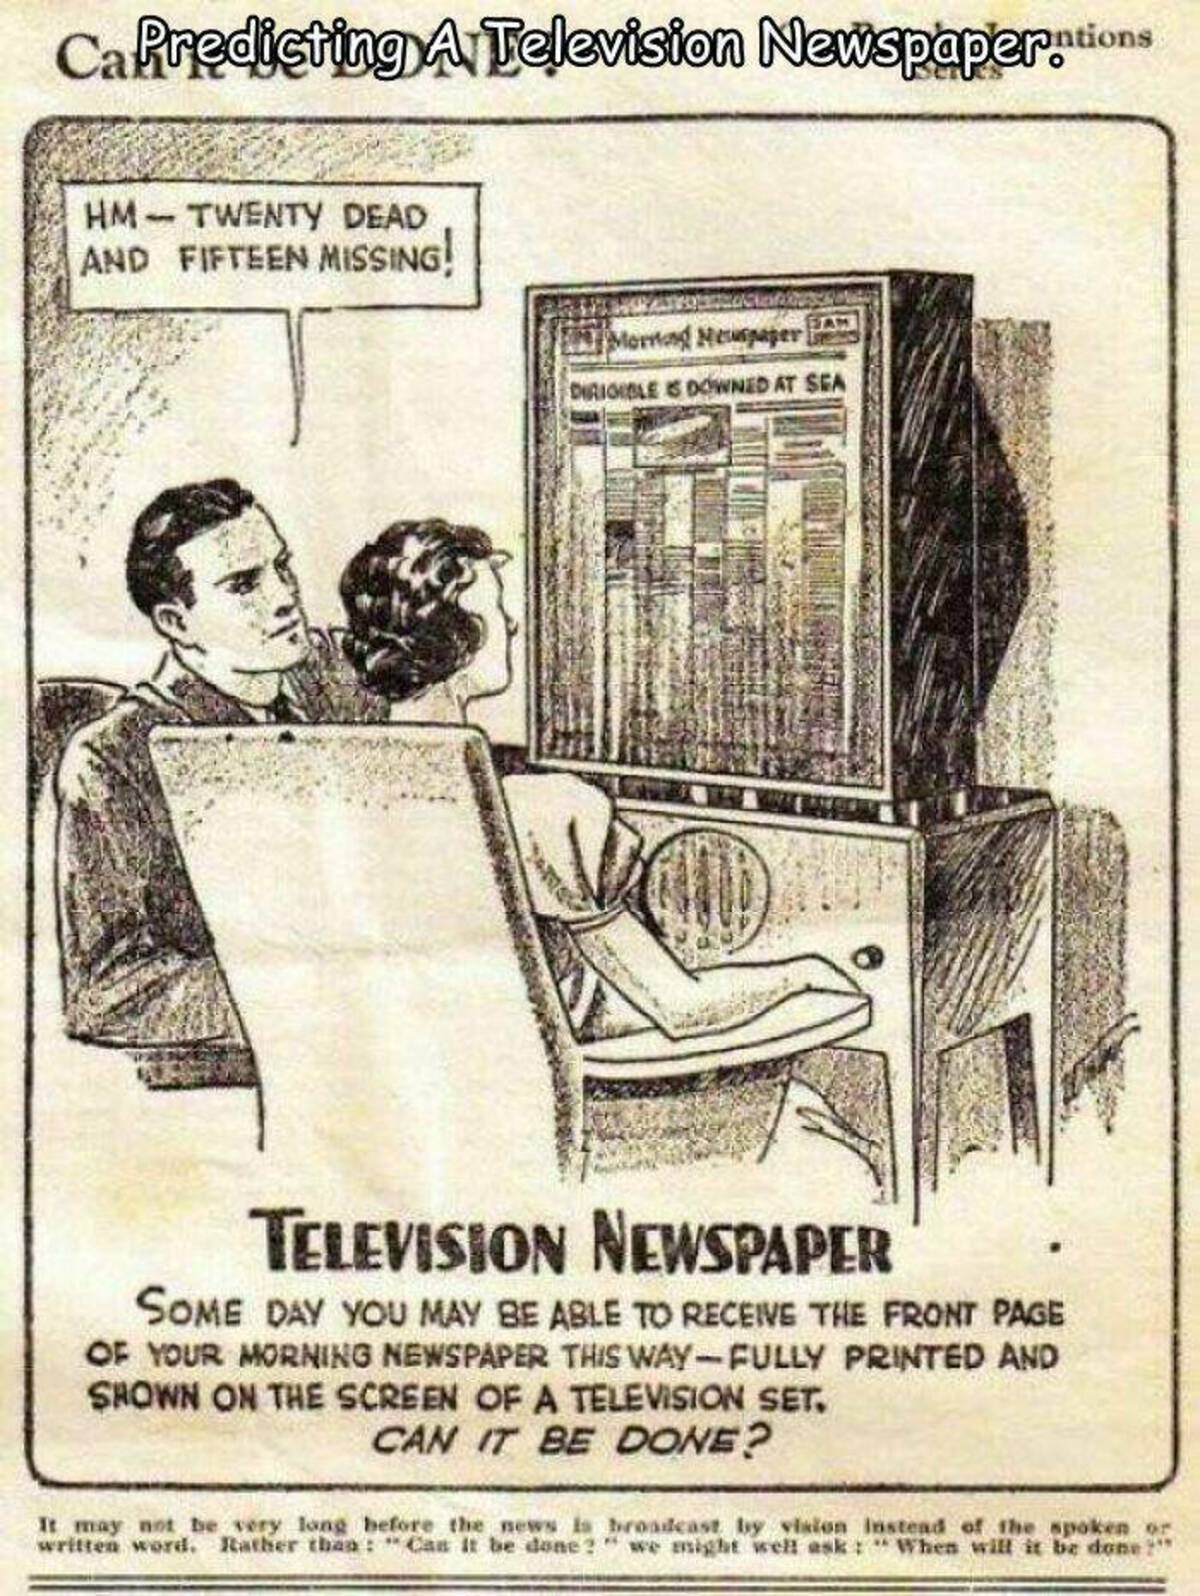 vintage future predictions - Ca Predicting A Television Newspaperations Hm Twenty Dead And Fifteen Missing! Morning Newspaper Exam Dirigible Is Downed At Sea Television Newspaper Some Day You May Be Able To Receive The Front Page Of Your Morning Newspaper